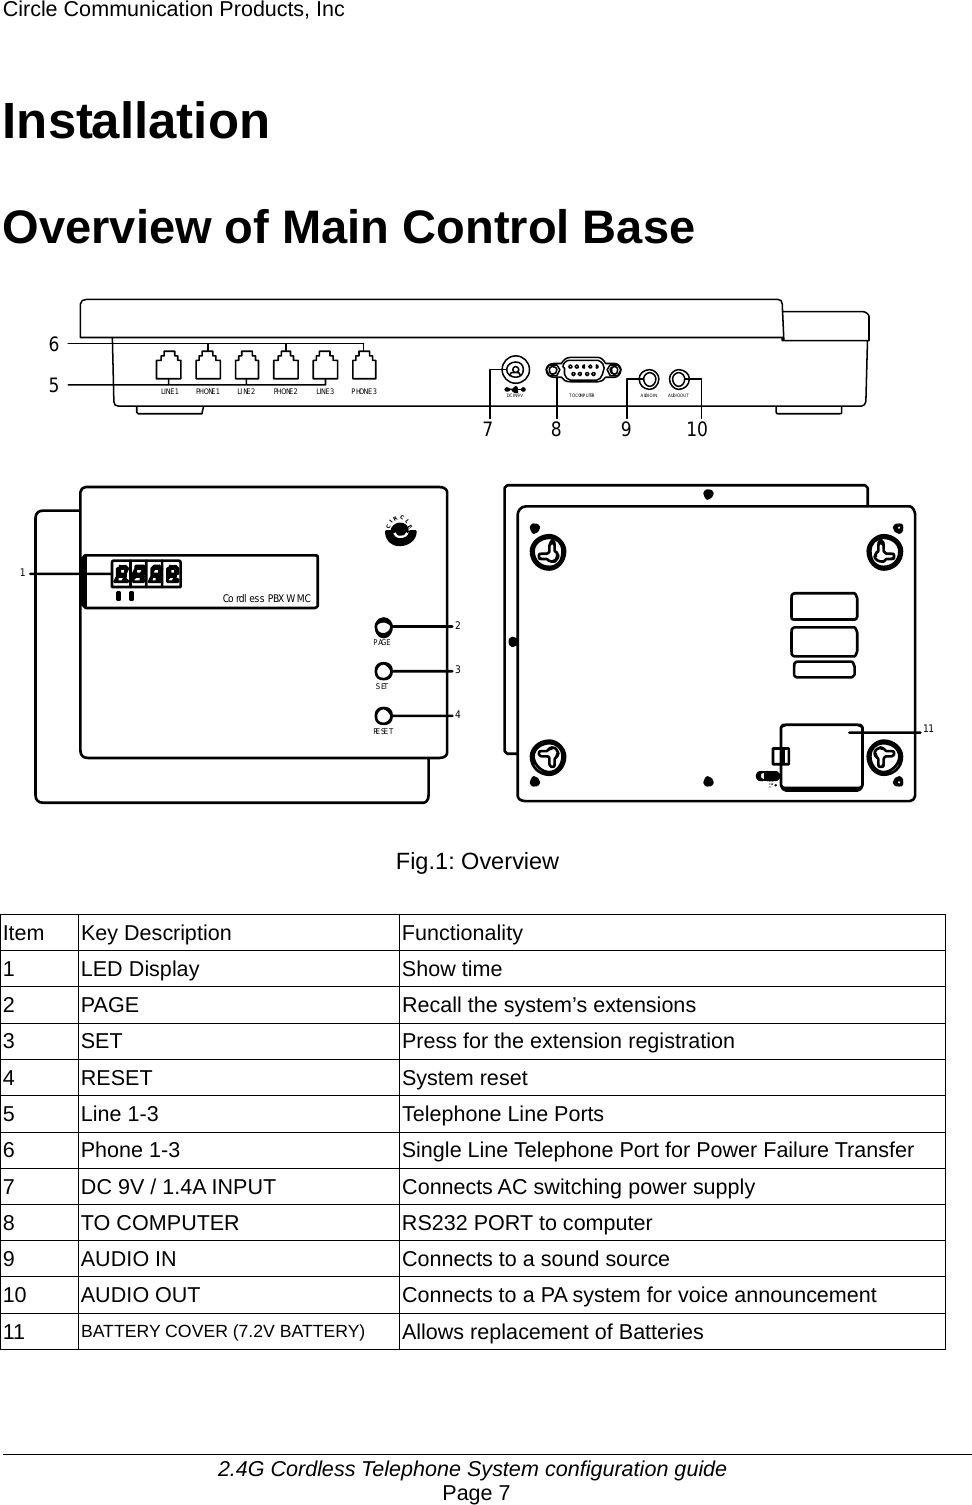 Circle Communication Products, Inc     2.4G Cordless Telephone System configuration guide Page 7 LINE 1 PHONE 1 LI NE 2 PHONE 2 LINE 3 P HONE 3DC IN 9V TO COMPUTER A UDIO IN56789AUDIO OUT10ECLCRICo rdl ess PBX  WMCPAGESETRESET1234LOCKDOOR11Installation Overview of Main Control Base                           Fig.1: Overview  Item Key Description  Functionality 1  LED Display  Show time 2  PAGE  Recall the system’s extensions 3  SET  Press for the extension registration 4 RESET  System reset 5  Line 1-3  Telephone Line Ports 6  Phone 1-3  Single Line Telephone Port for Power Failure Transfer   7  DC 9V / 1.4A INPUT  Connects AC switching power supply 8  TO COMPUTER    RS232 PORT to computer 9  AUDIO IN  Connects to a sound source 10  AUDIO OUT  Connects to a PA system for voice announcement 11  BATTERY COVER (7.2V BATTERY)  Allows replacement of Batteries  